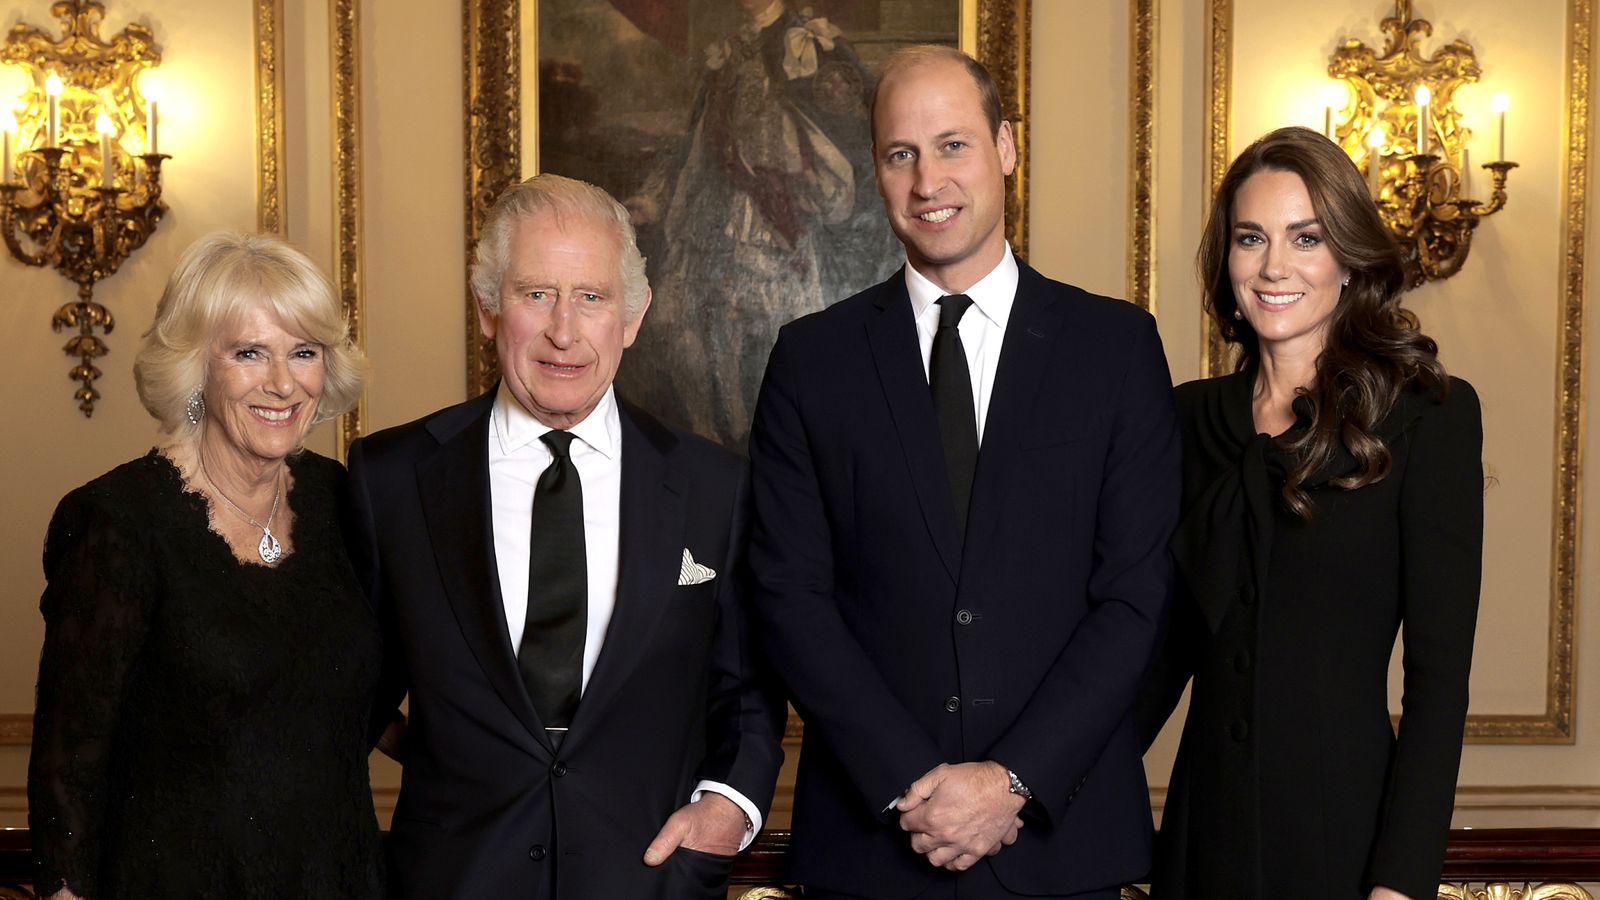 First official photo of King and Queen Consort alongside Prince and Princess of Wales released